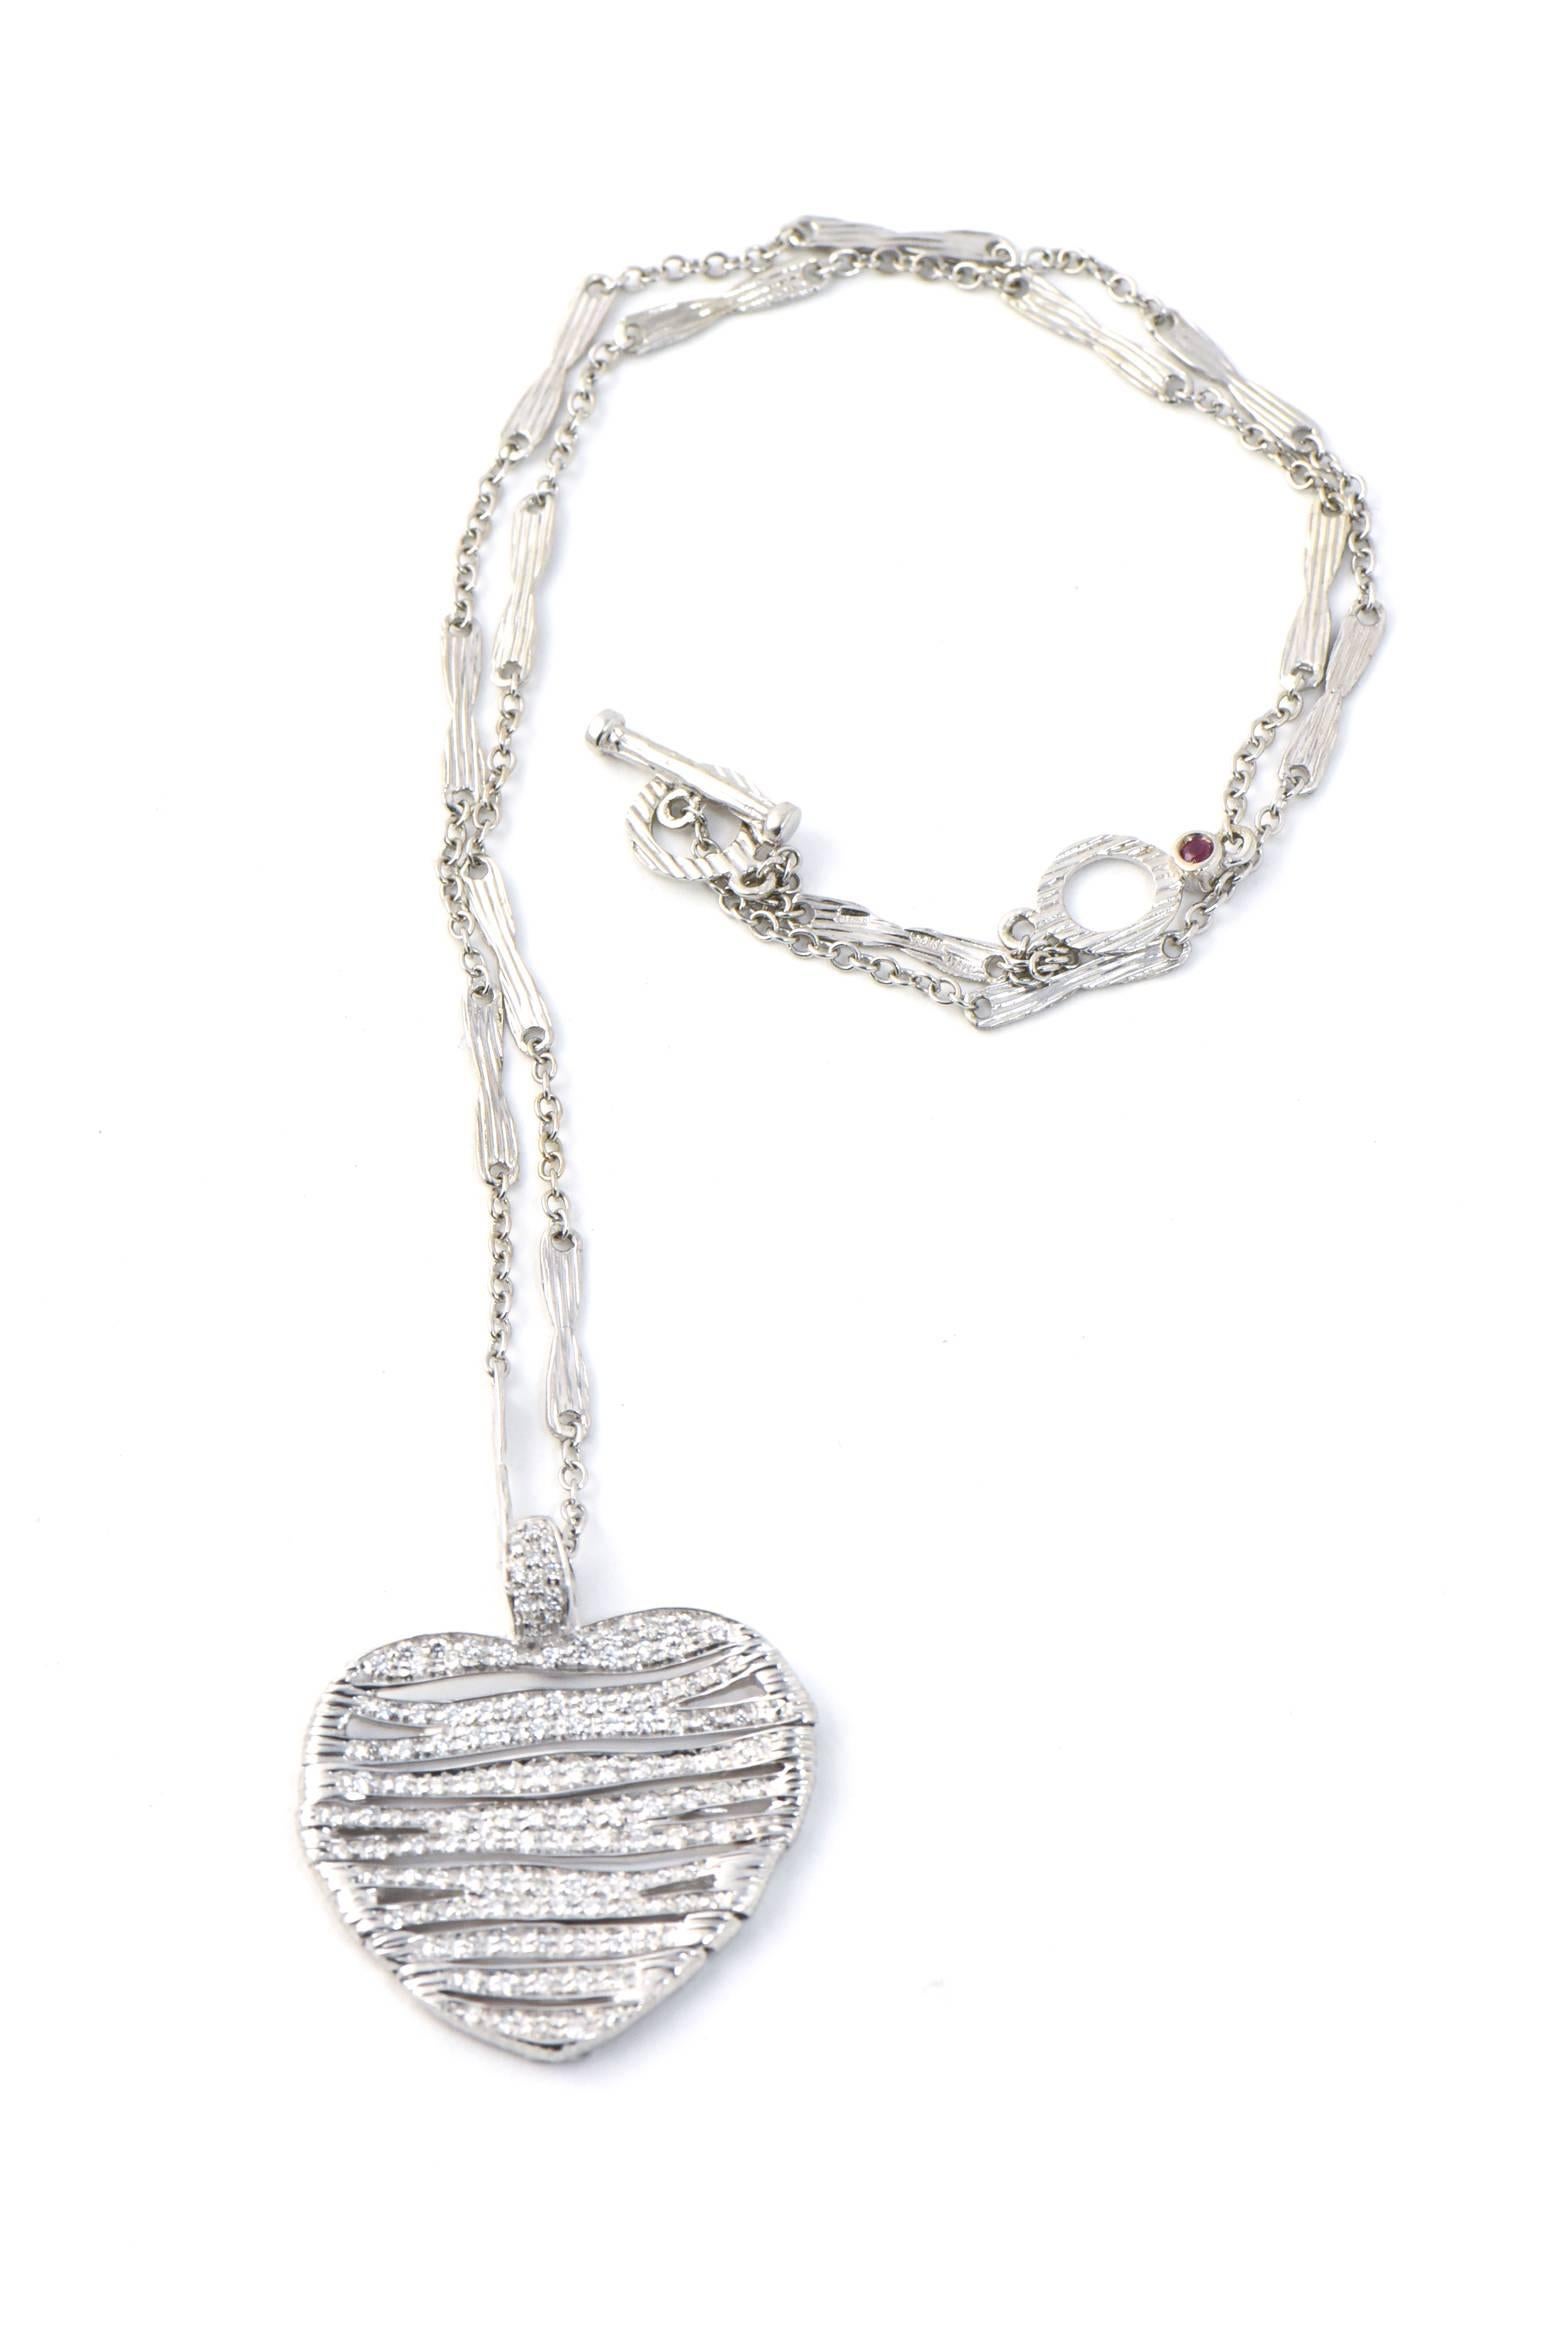 Roberto Coin Diamond Heart Pendant from Elephant (Elefantino) Collection
consisting of an 18k white gold heart pendant which is a textured, slightly oval articulated pendant, set throughout with round brilliant cut diamonds. The pendant is